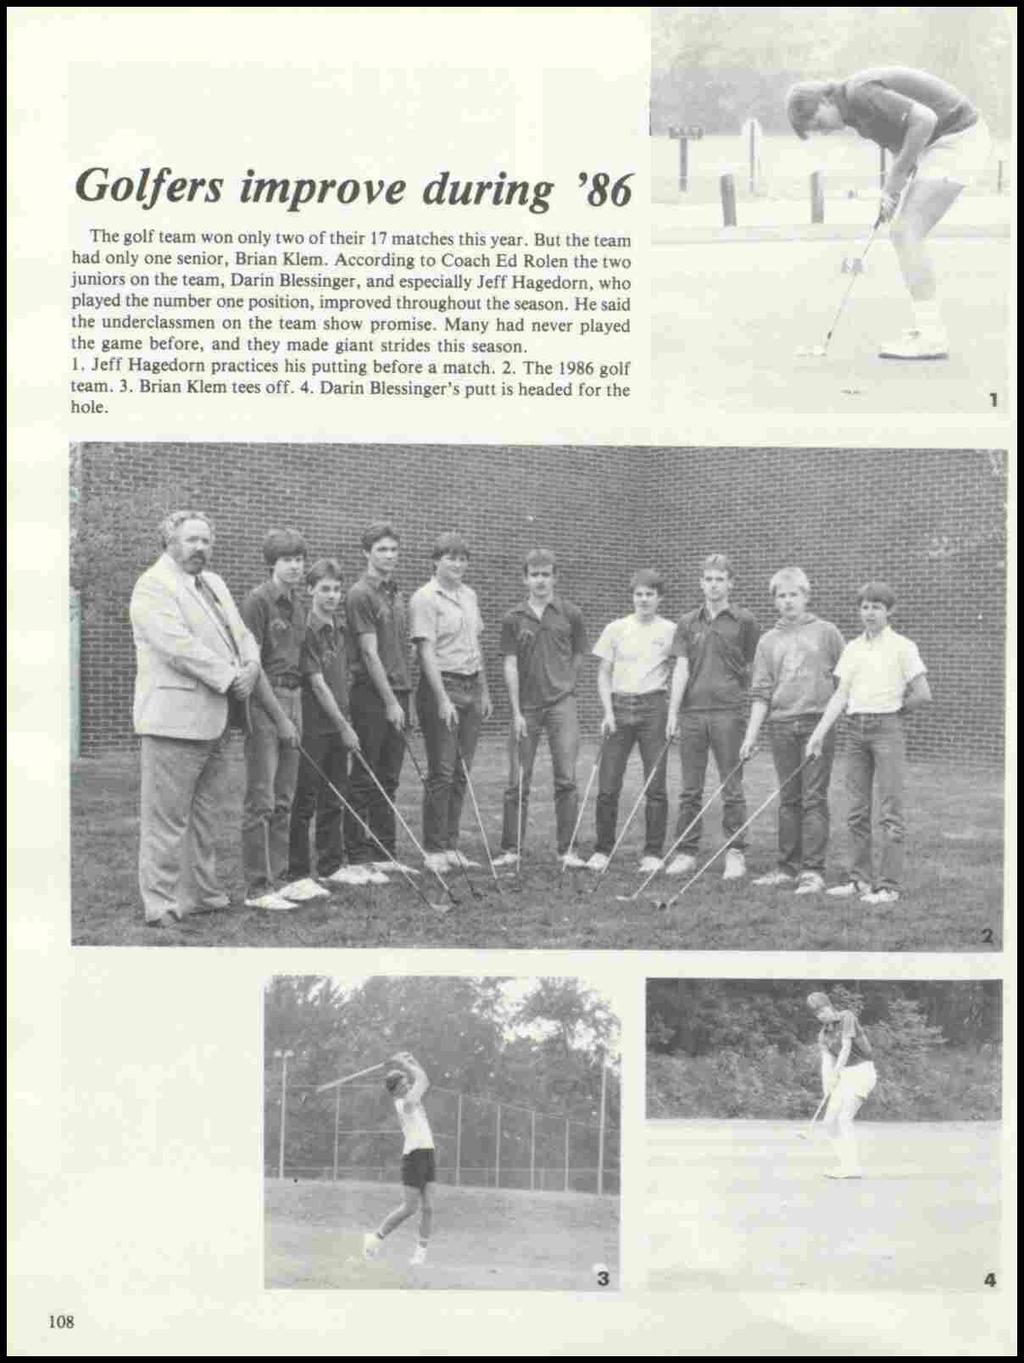 Golfers improve during '86 The golf team won only two of their 17 matches this year. But the team had only one senior, Brian Klem.